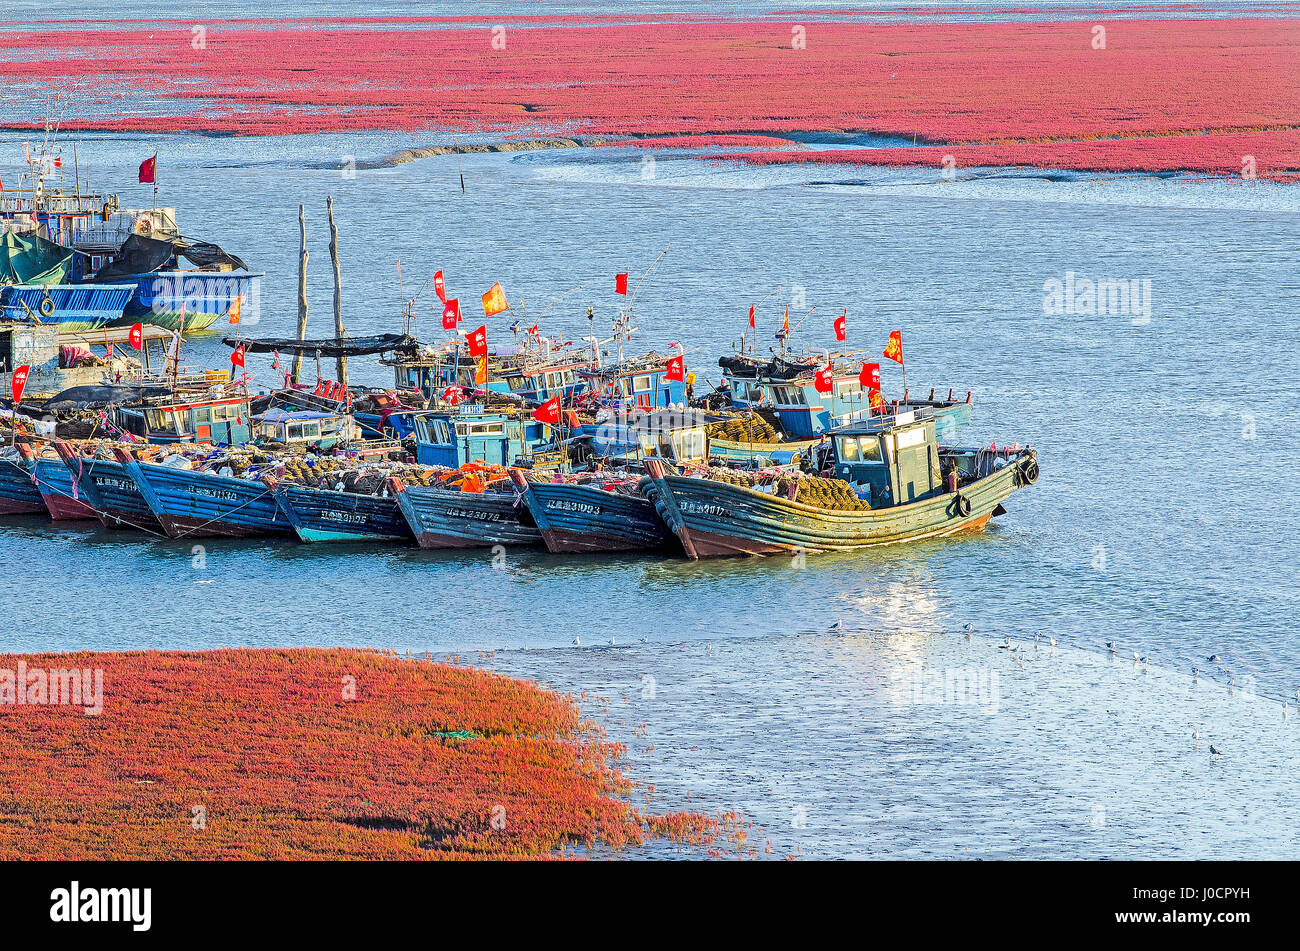 The fishing fleet at Erjiegou, near Panjin, China, and the so called Red Beach, an area of salt marsh where a plant known as suaeda grass thrives. Stock Photo